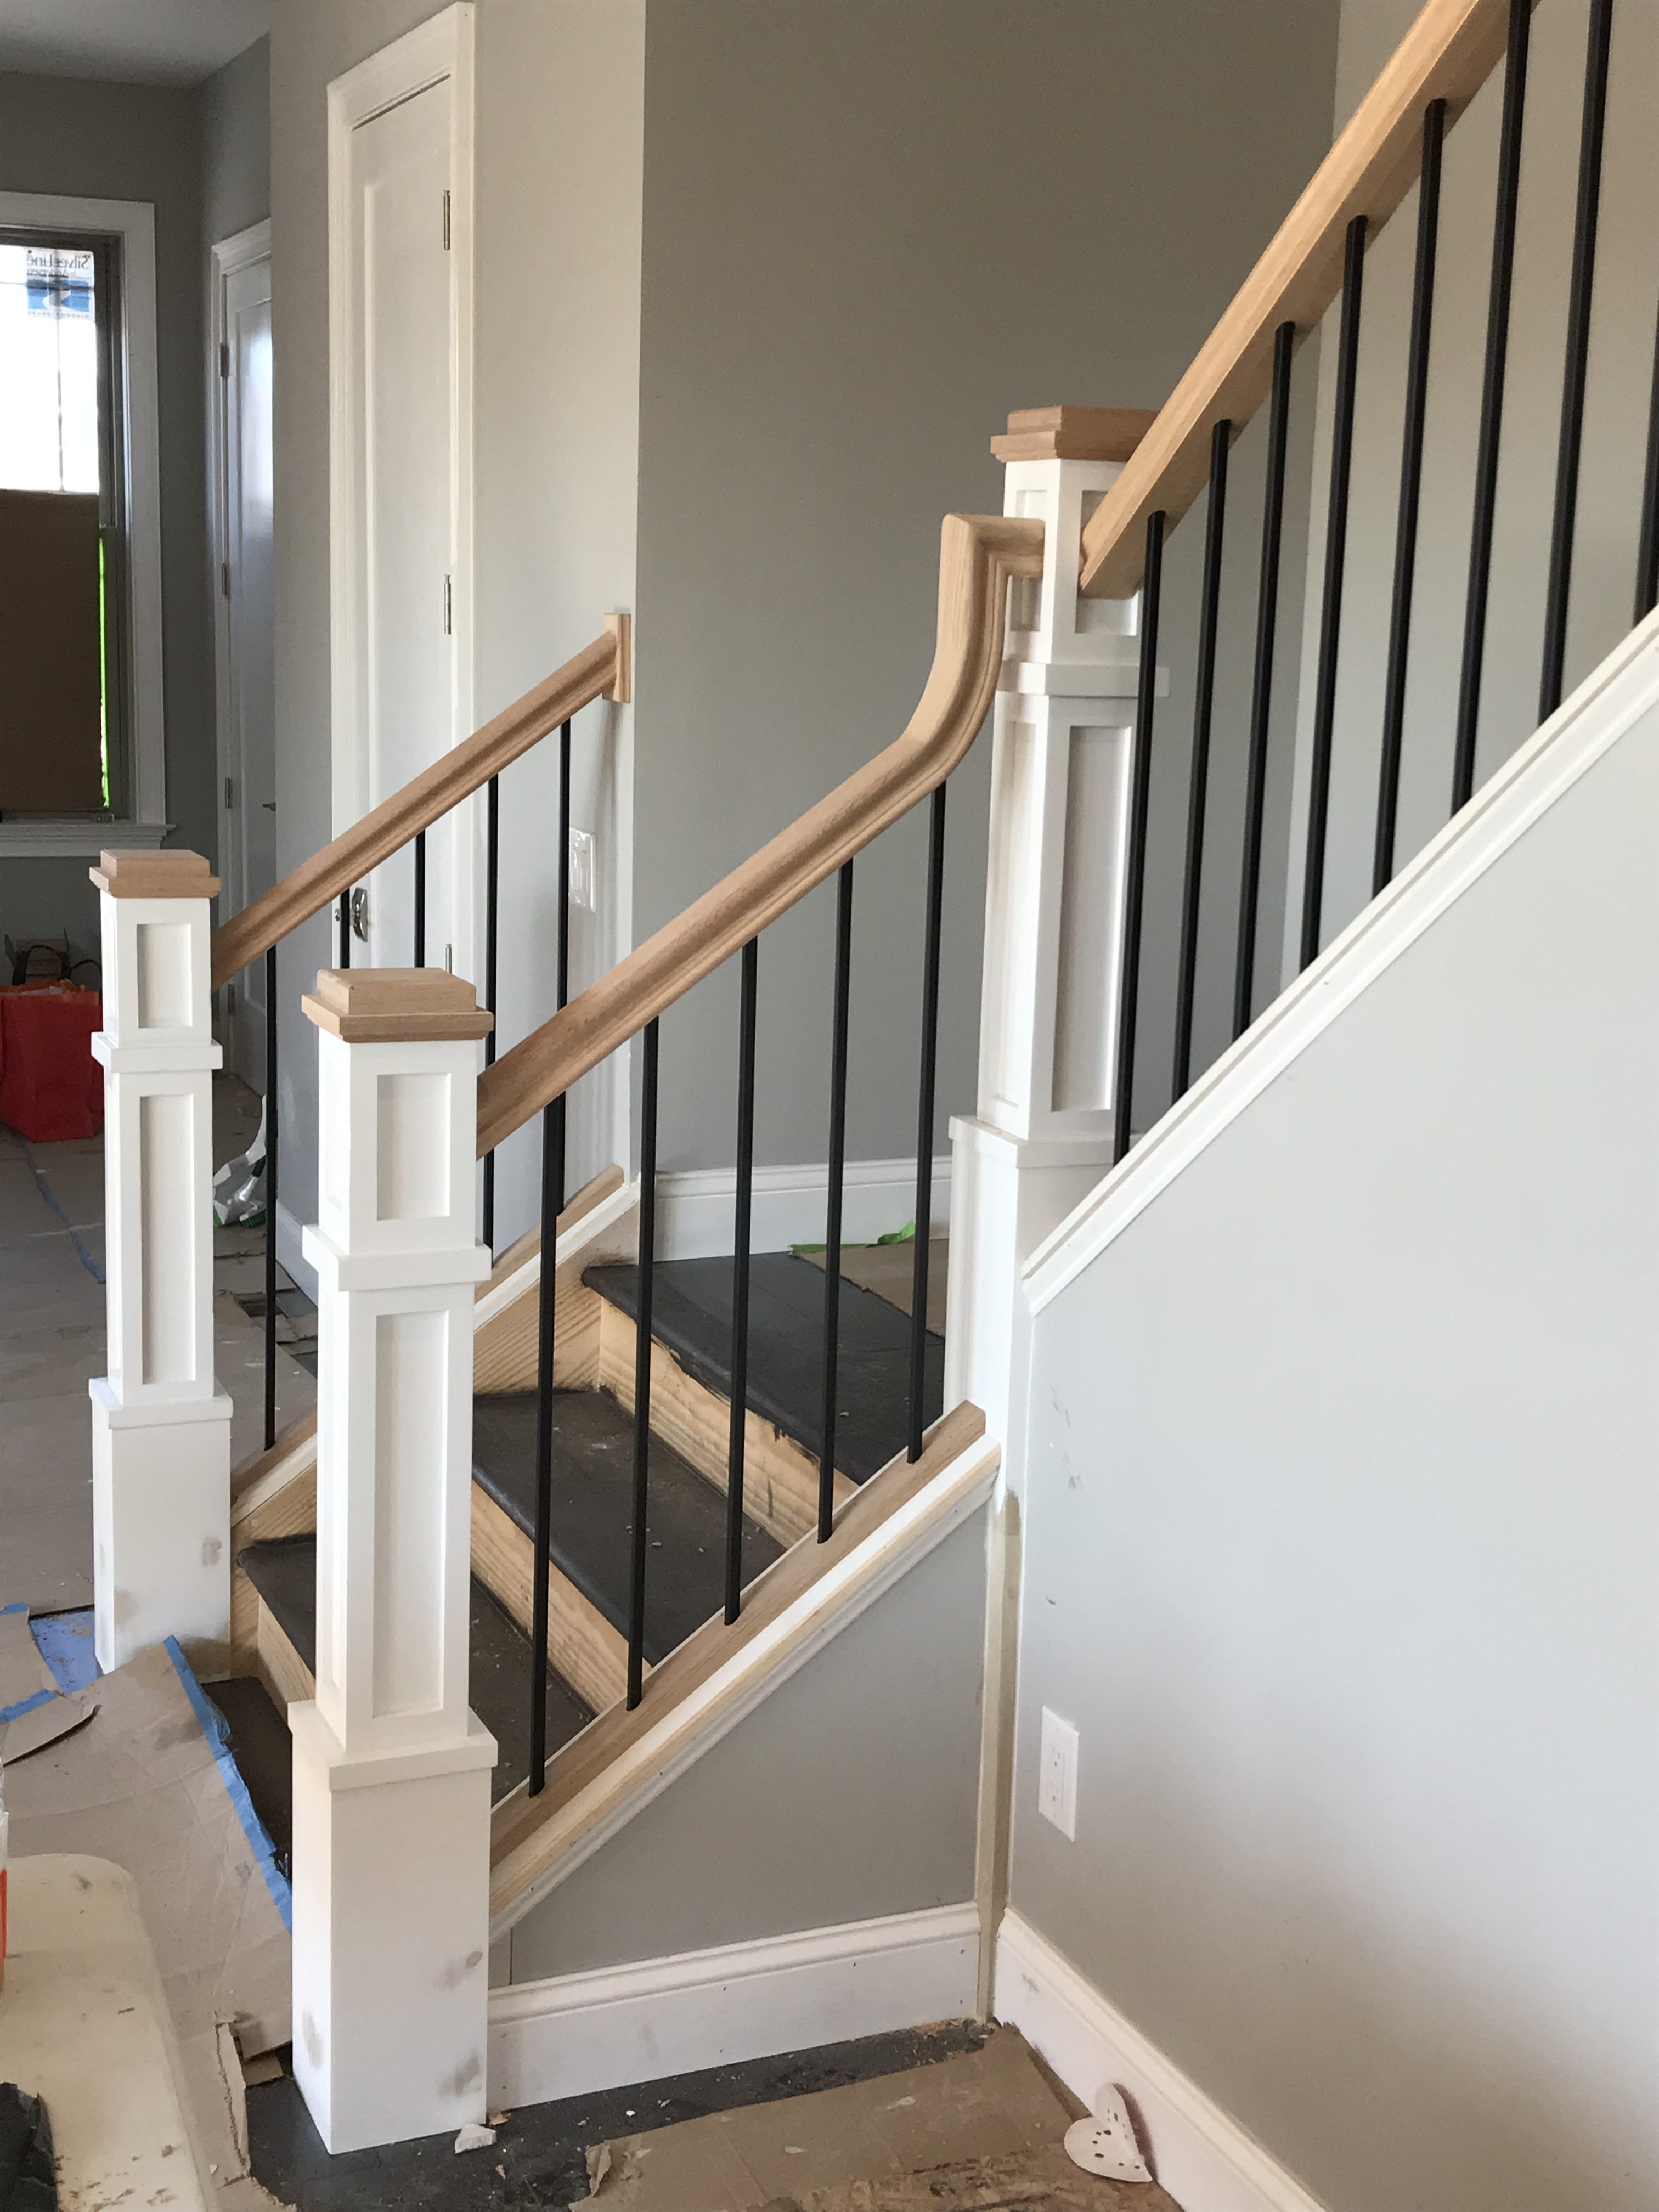 Stair Systems - Stairs, Stair Parts, Newels, Balusters and Railings | LJ  Smith Stair Systems